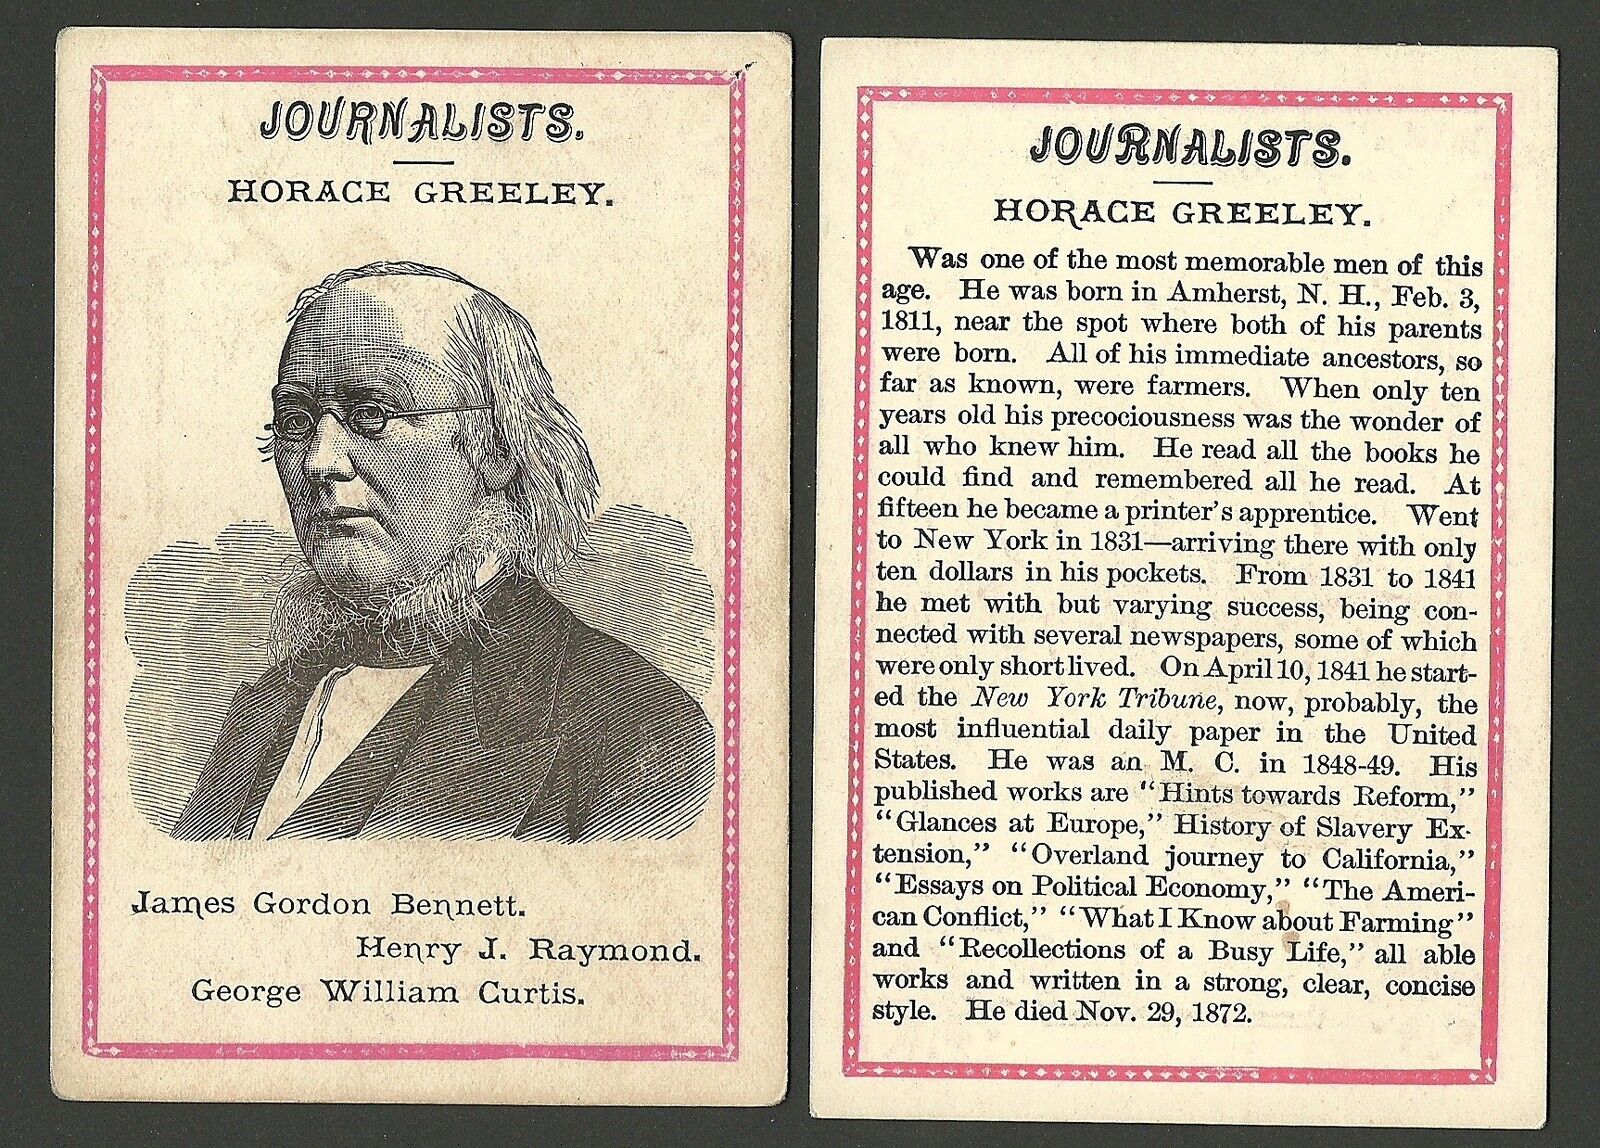 Horace Greeley Journalist Author of Political Reform Famous Person History Card